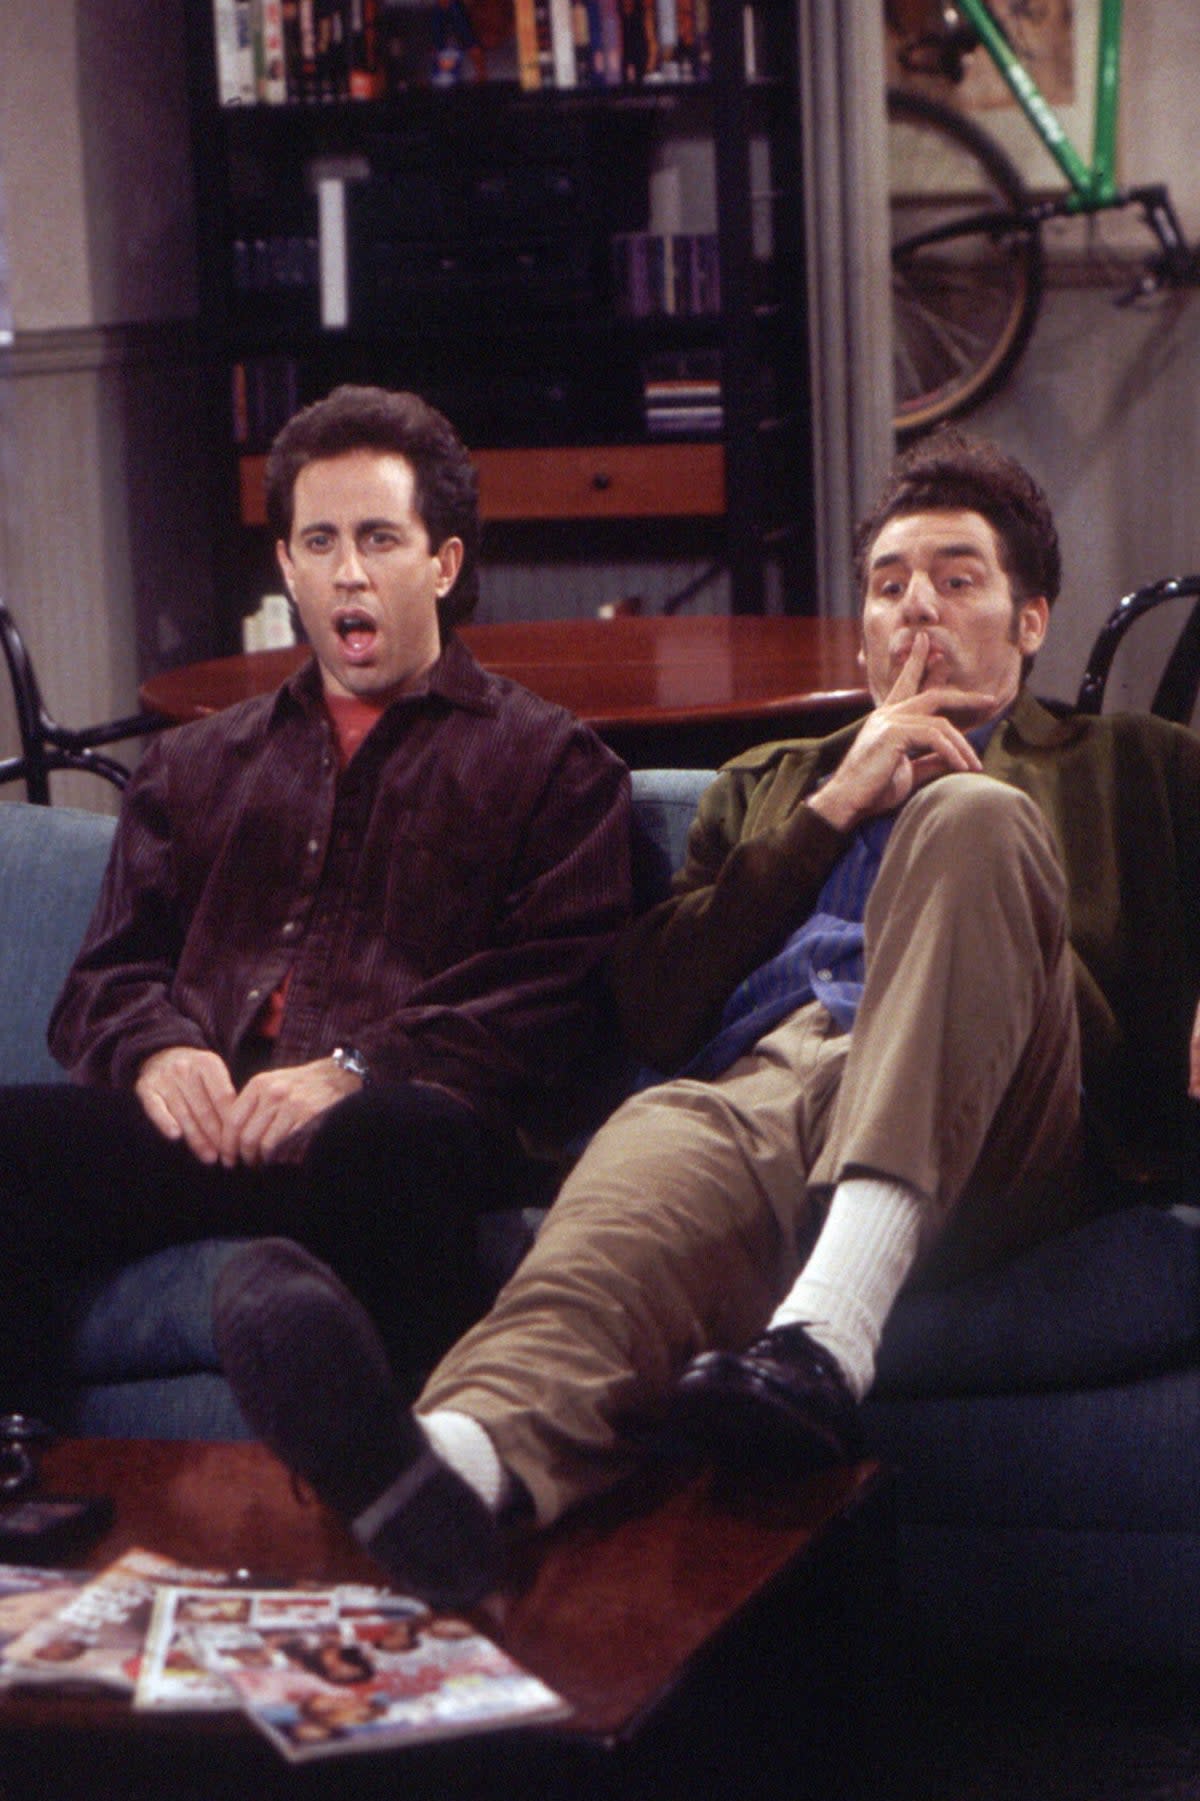 Shock comedy: Jerry Seinfeld and Michael Richards in an episode of ‘Seinfeld’ (Shutterstock)